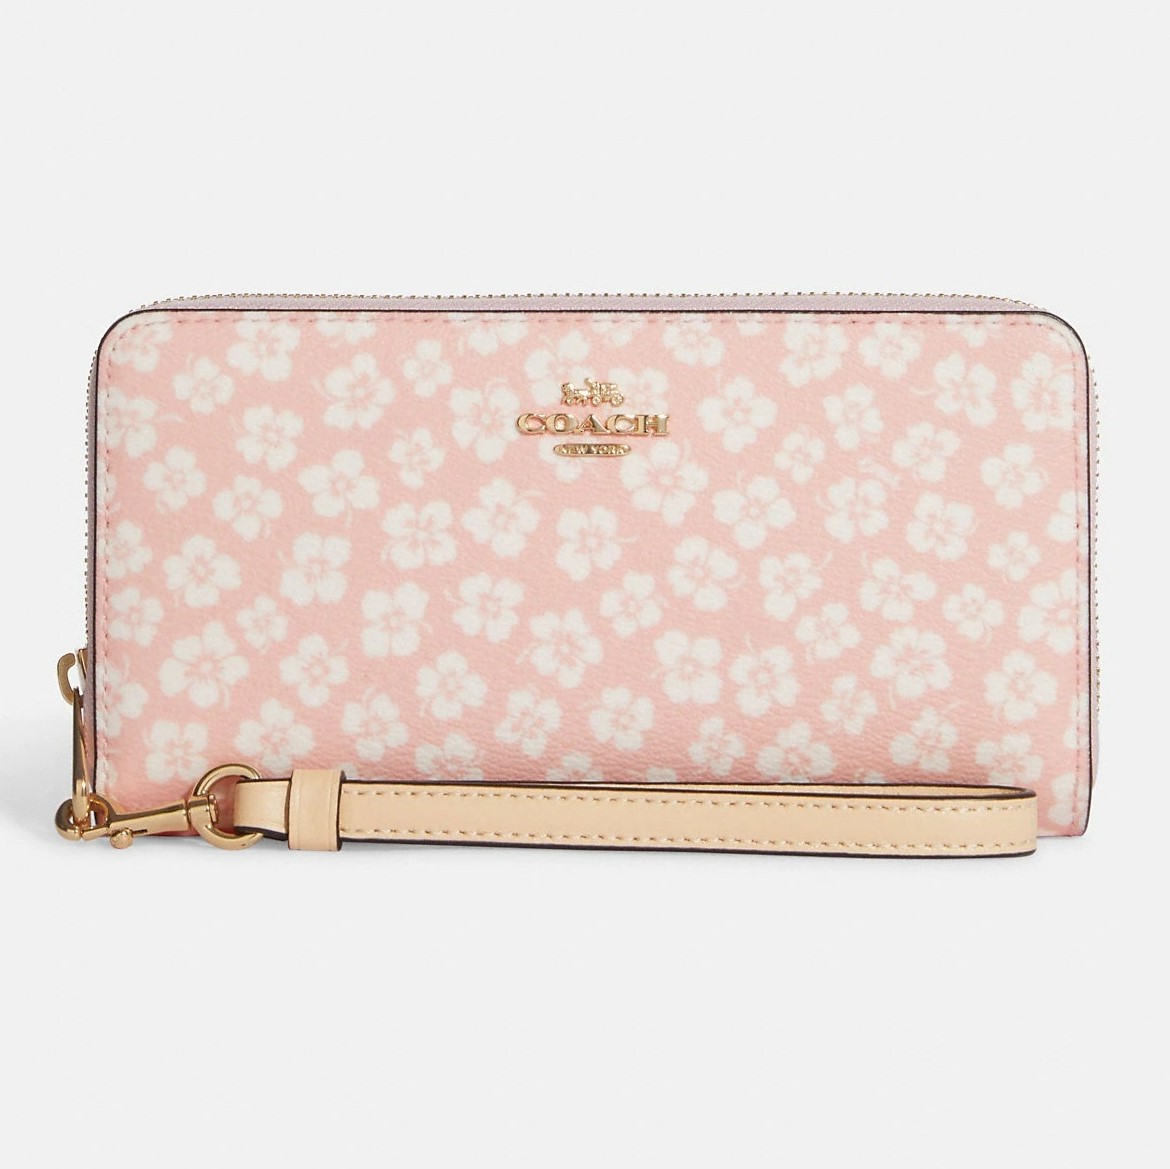 VÍ DÀI HỒNG PHẤN COACH LONG ZIP AROUND WALLET WITH GRAPHIC DITSY FLORAL PRINT 2